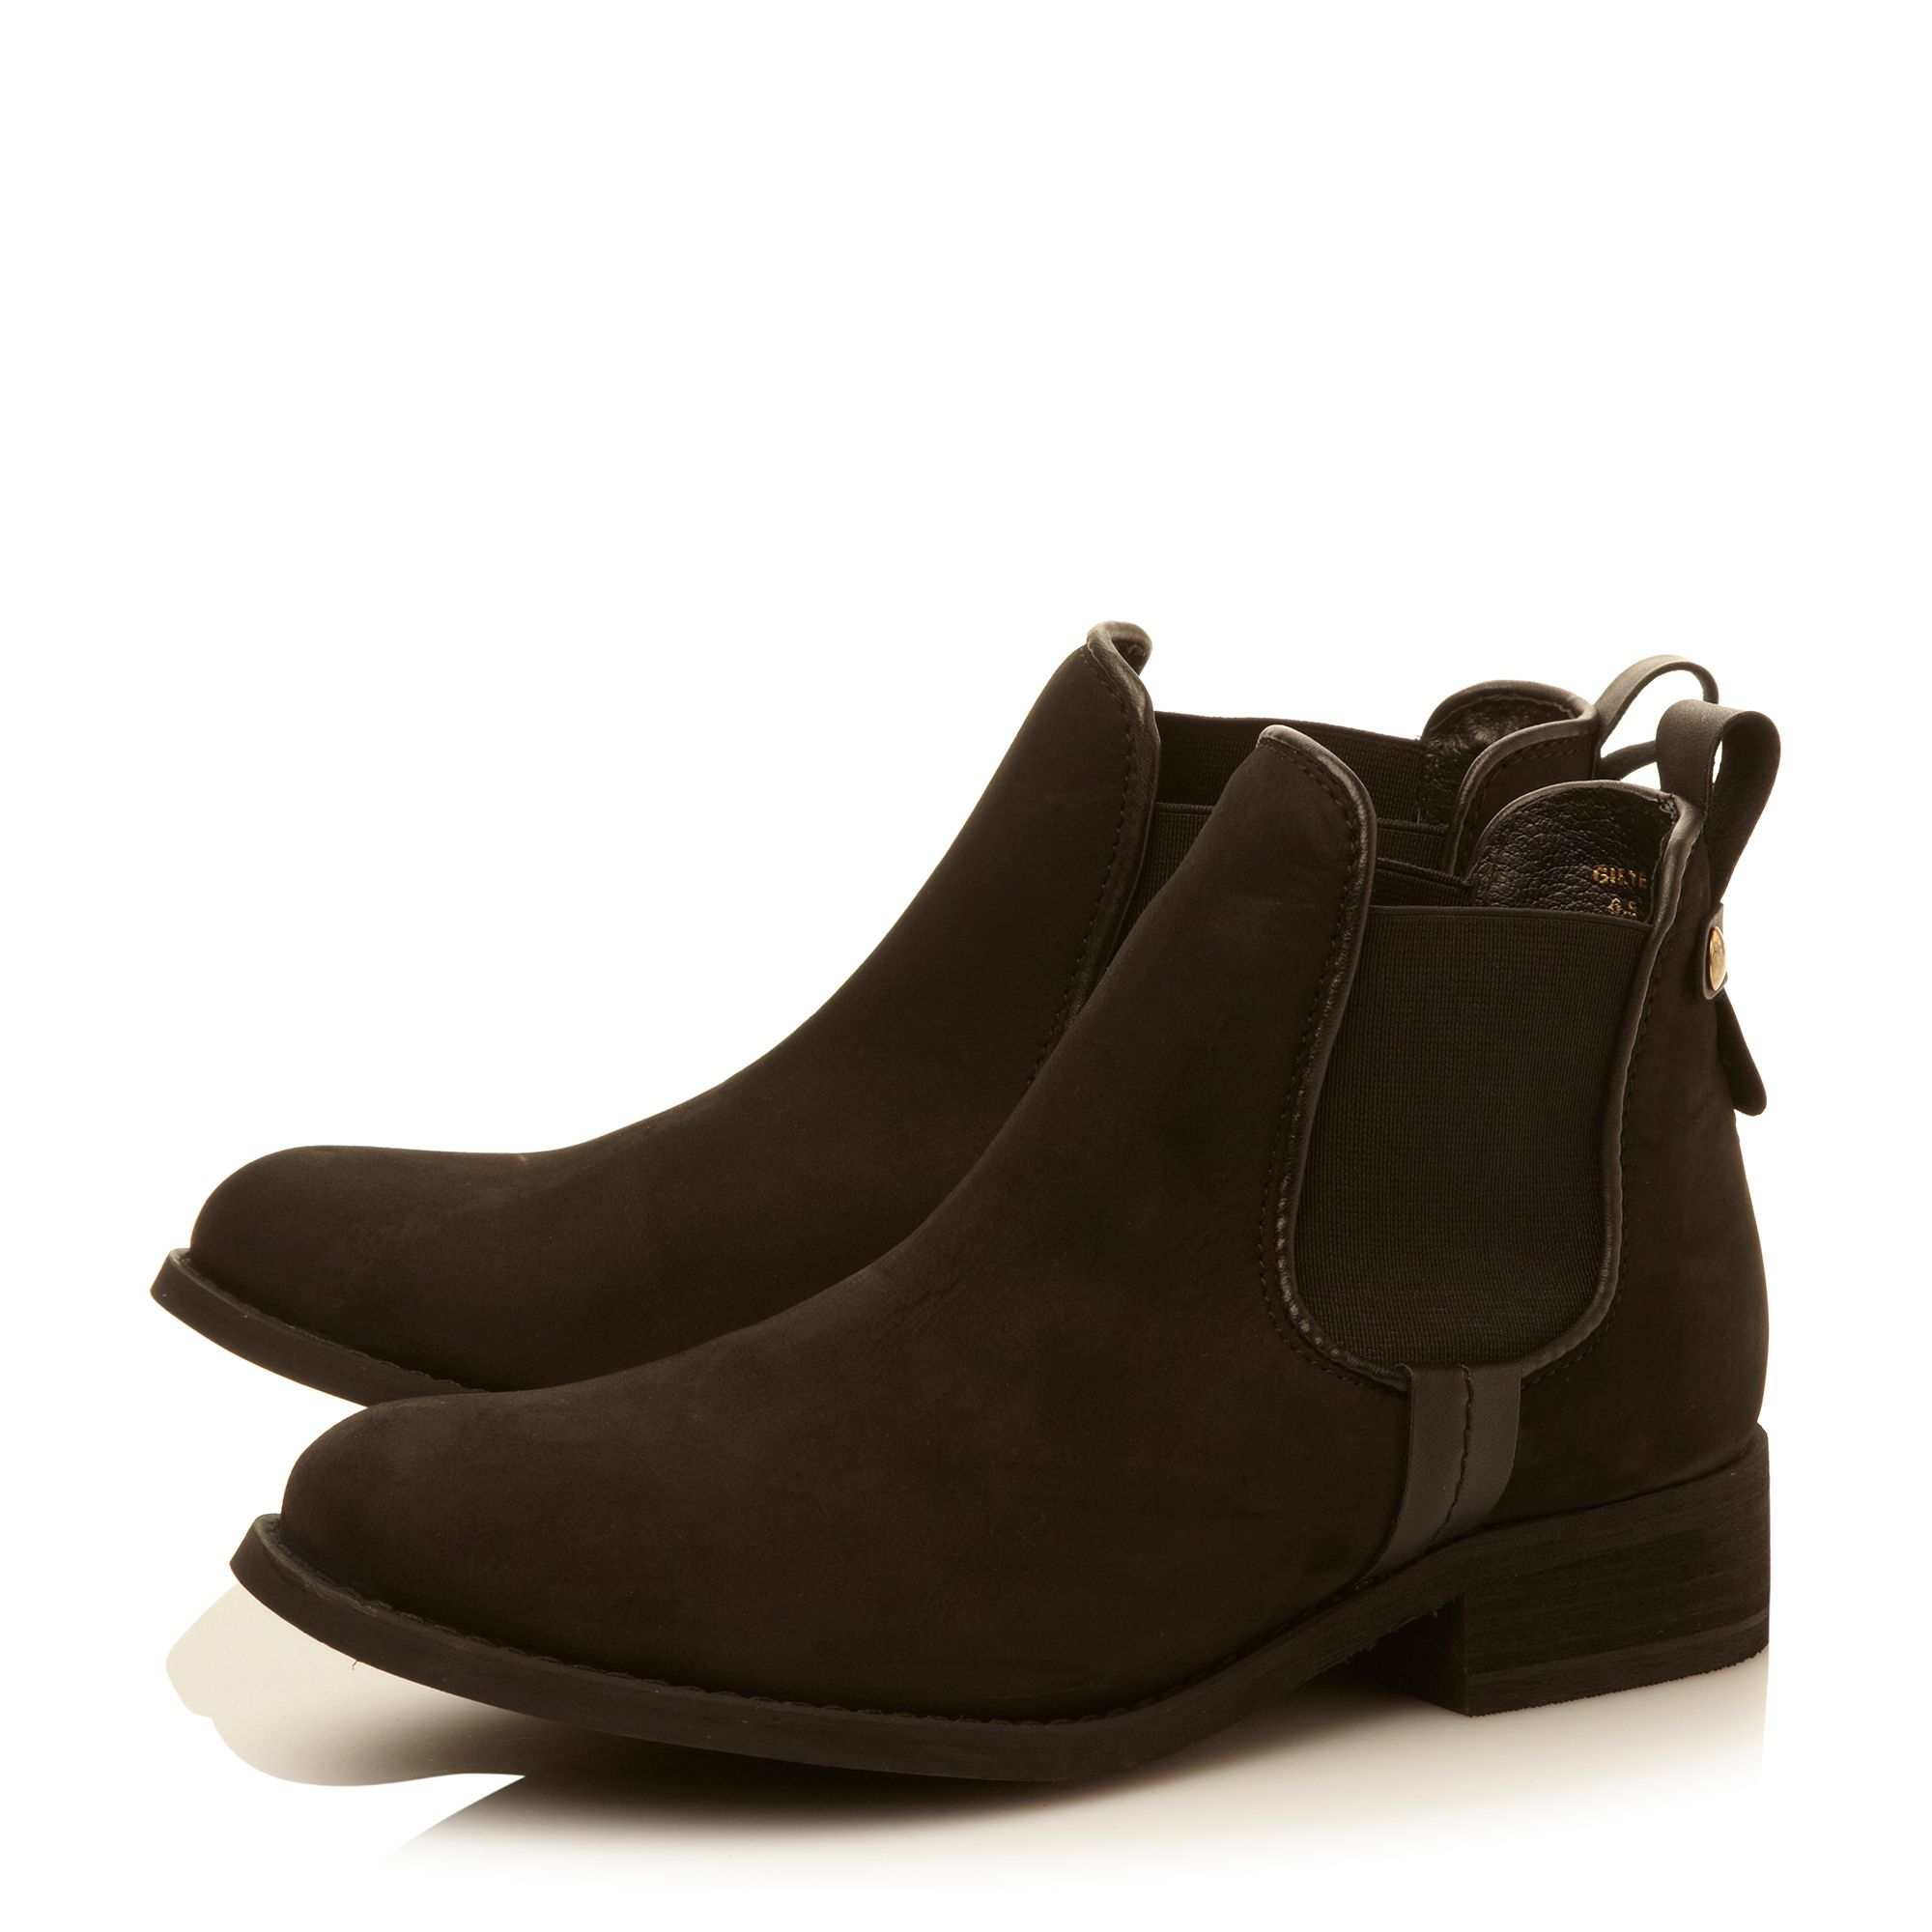 Steve madden gilte chelsea ankle boots.ankle boots. Low (39mm and ...